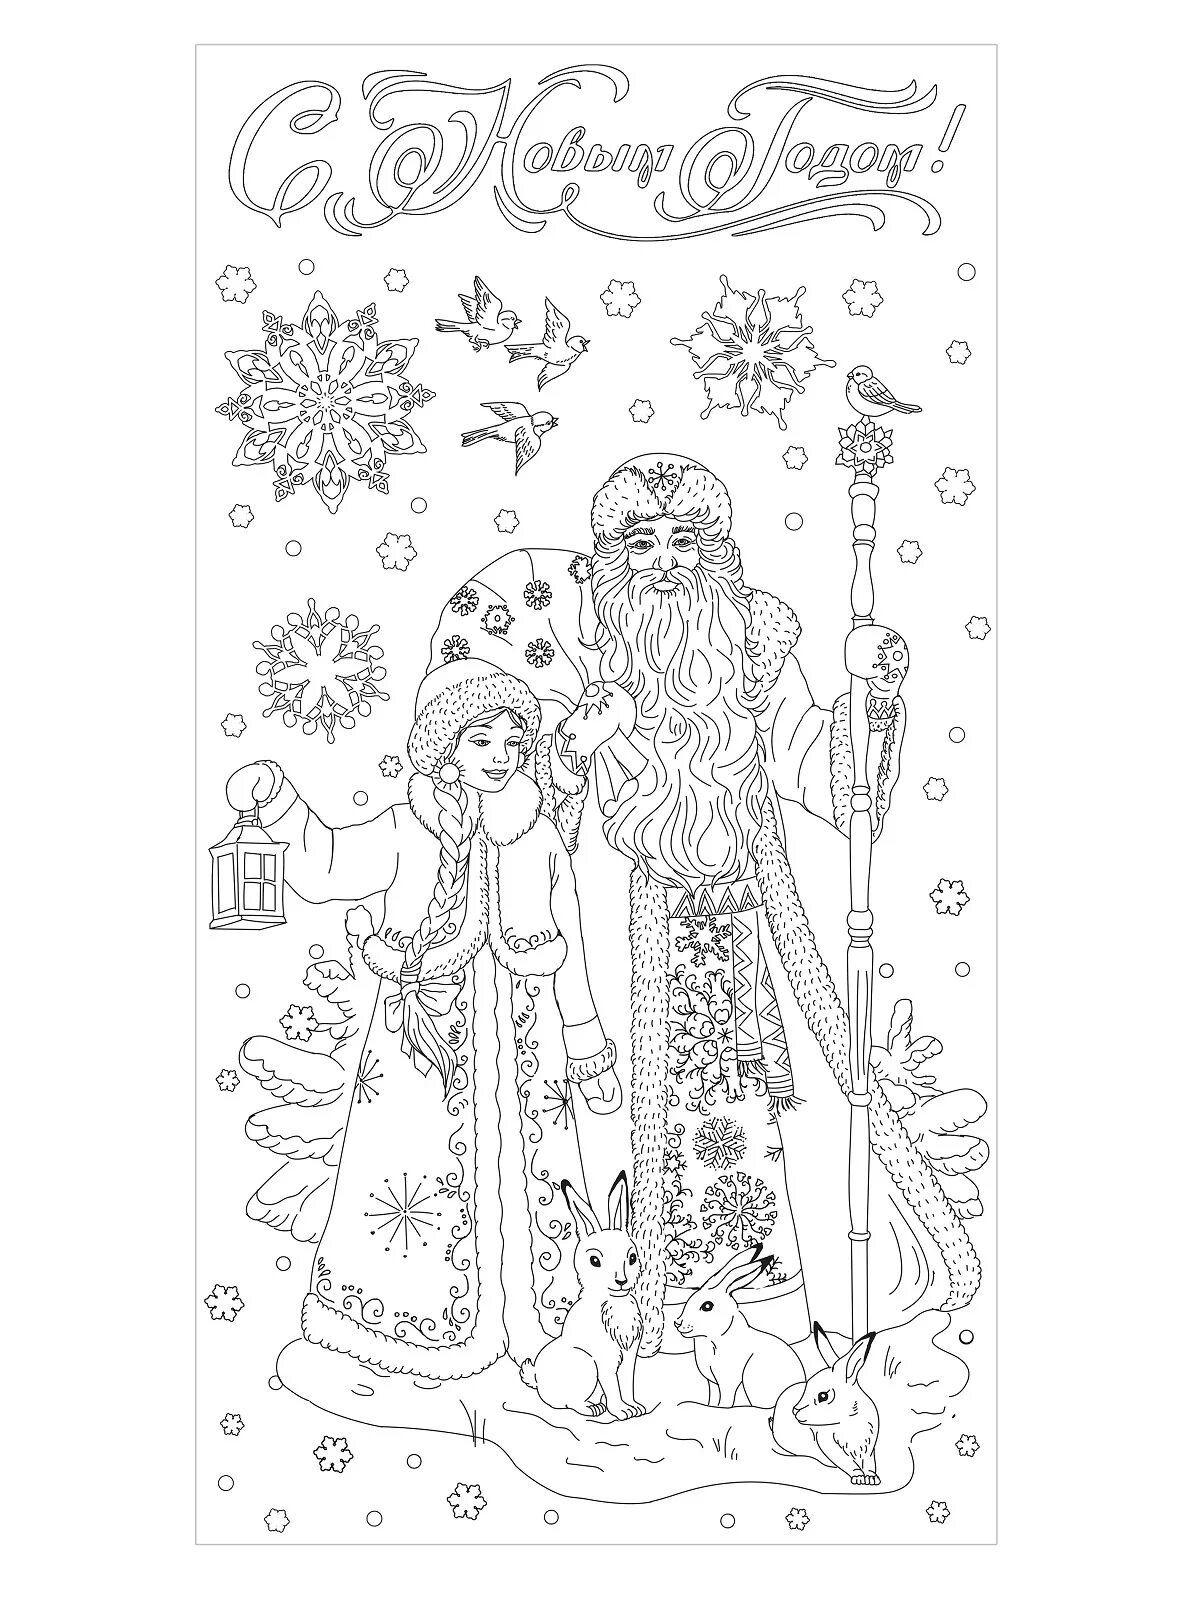 Coloring page magnanimous snow maiden